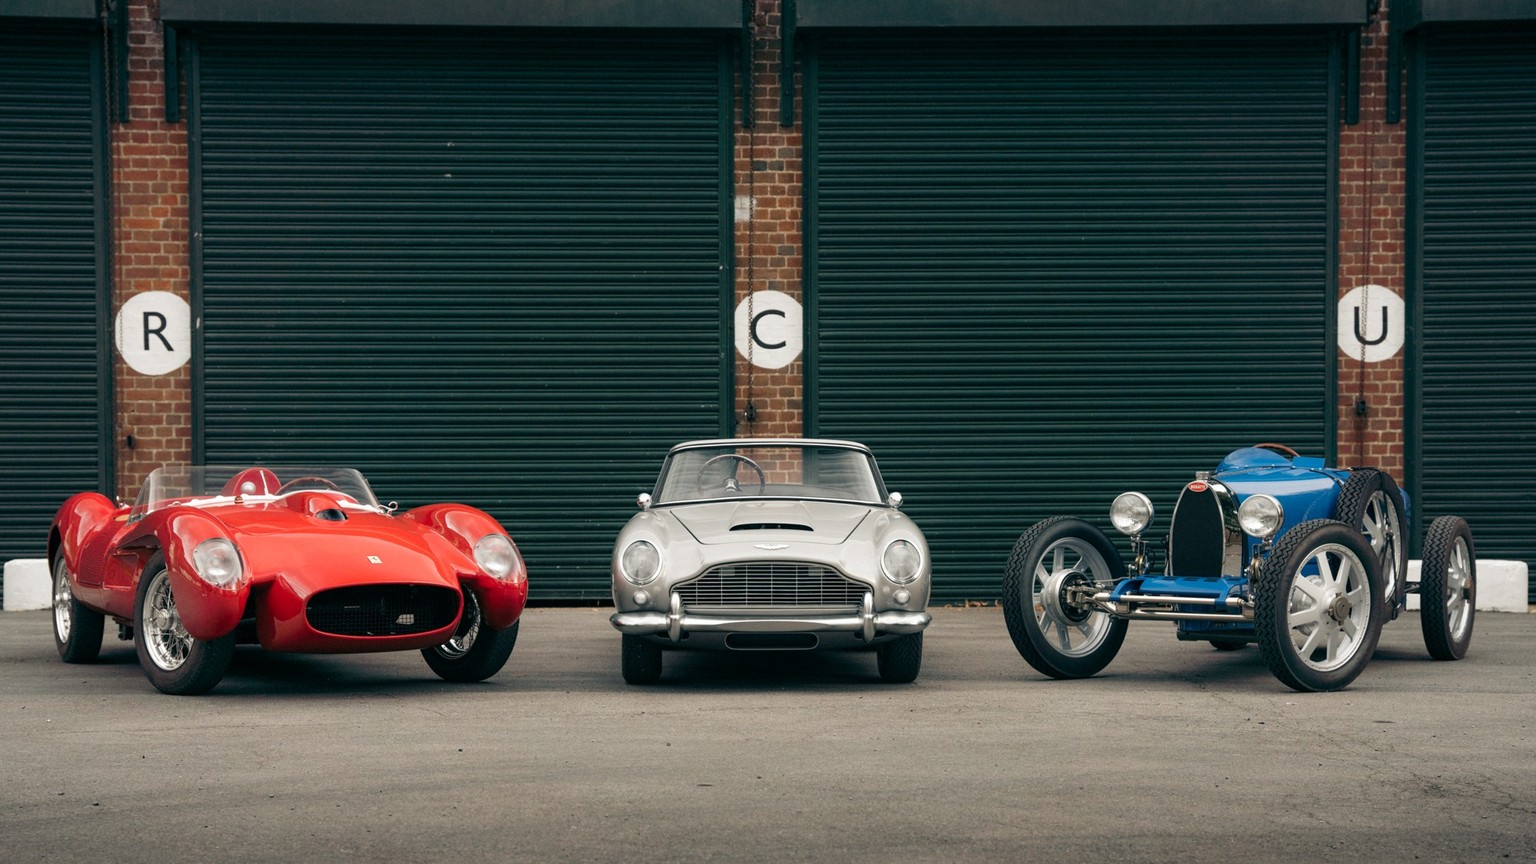 Bicester Heritage Little Car Company Ferrari 250 Testa Rossa Aston Martin DB5 Bugatti Type 35 https://thelittlecar.co/the-little-car-company-launches-series-b-funding-as-it-expands-production-and-work ...